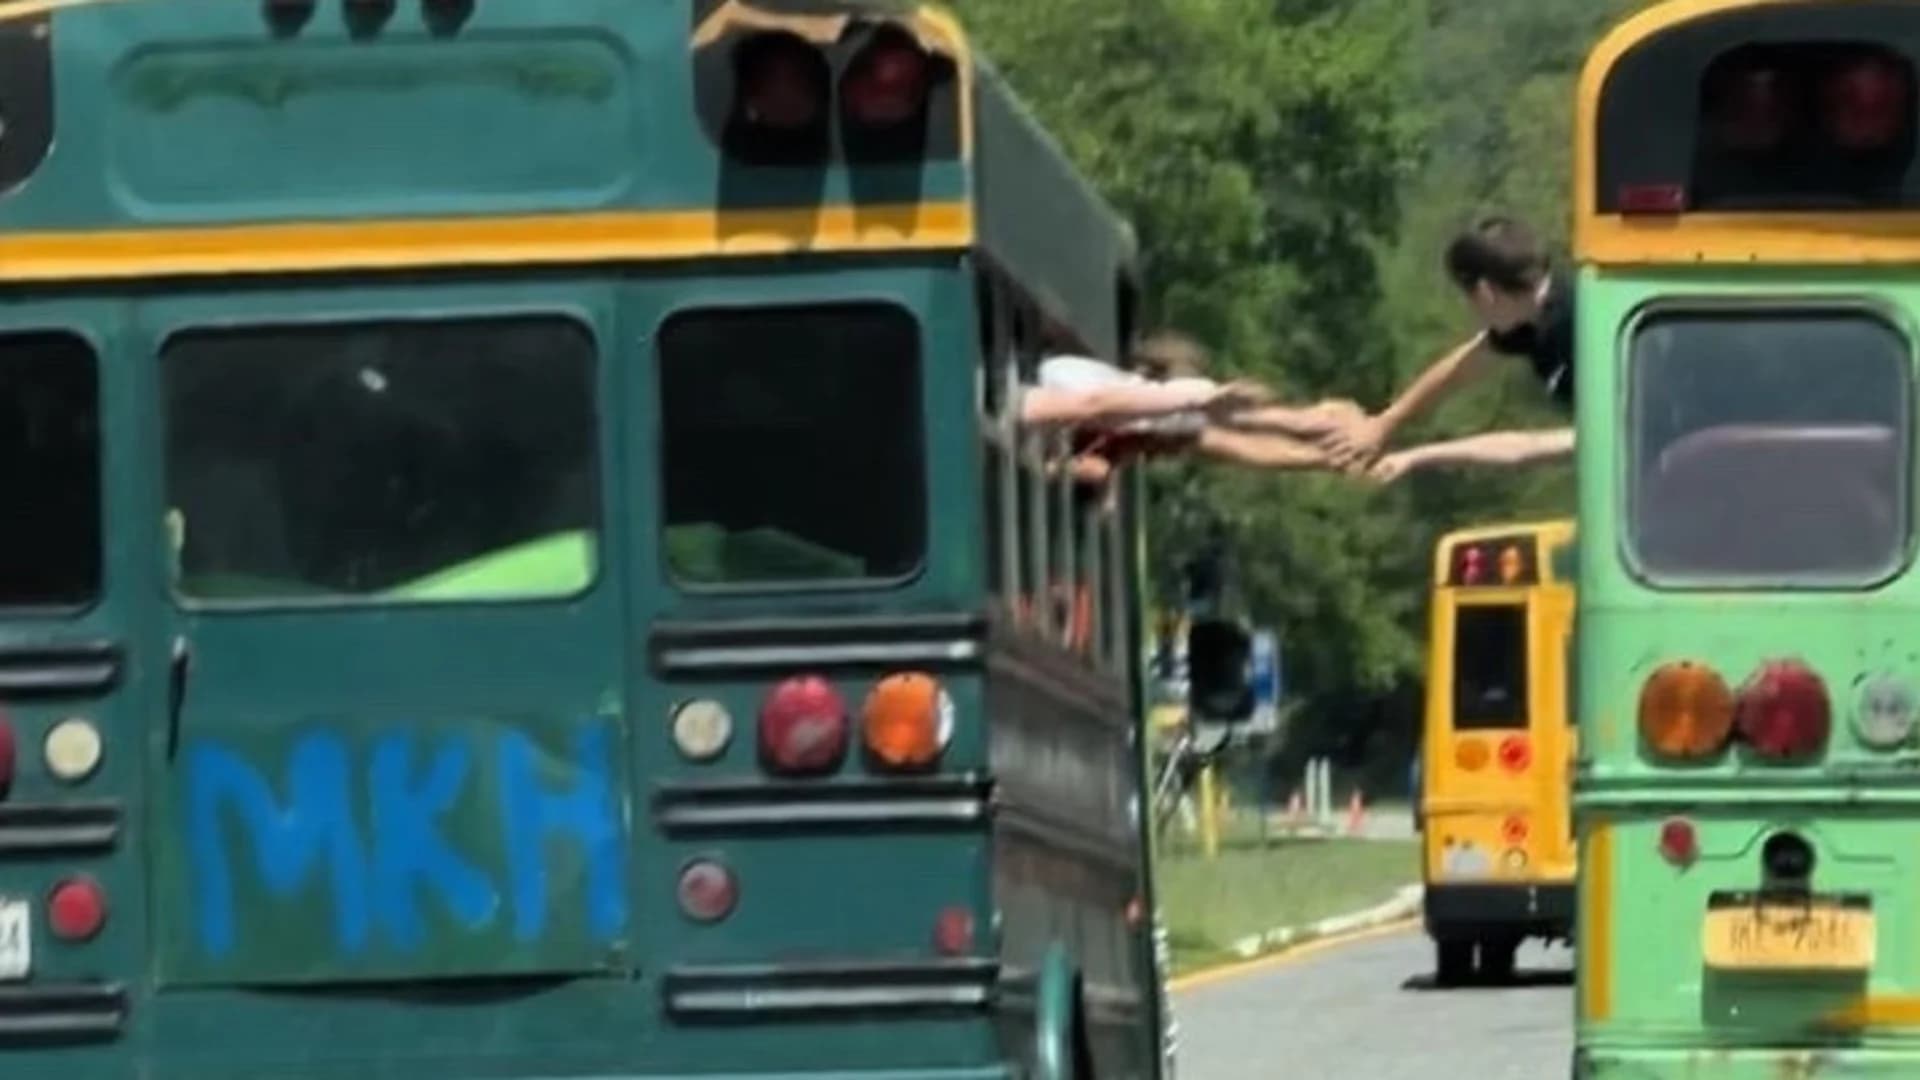 Caught on video: State police probe dangerous bus incident on Palisades Parkway